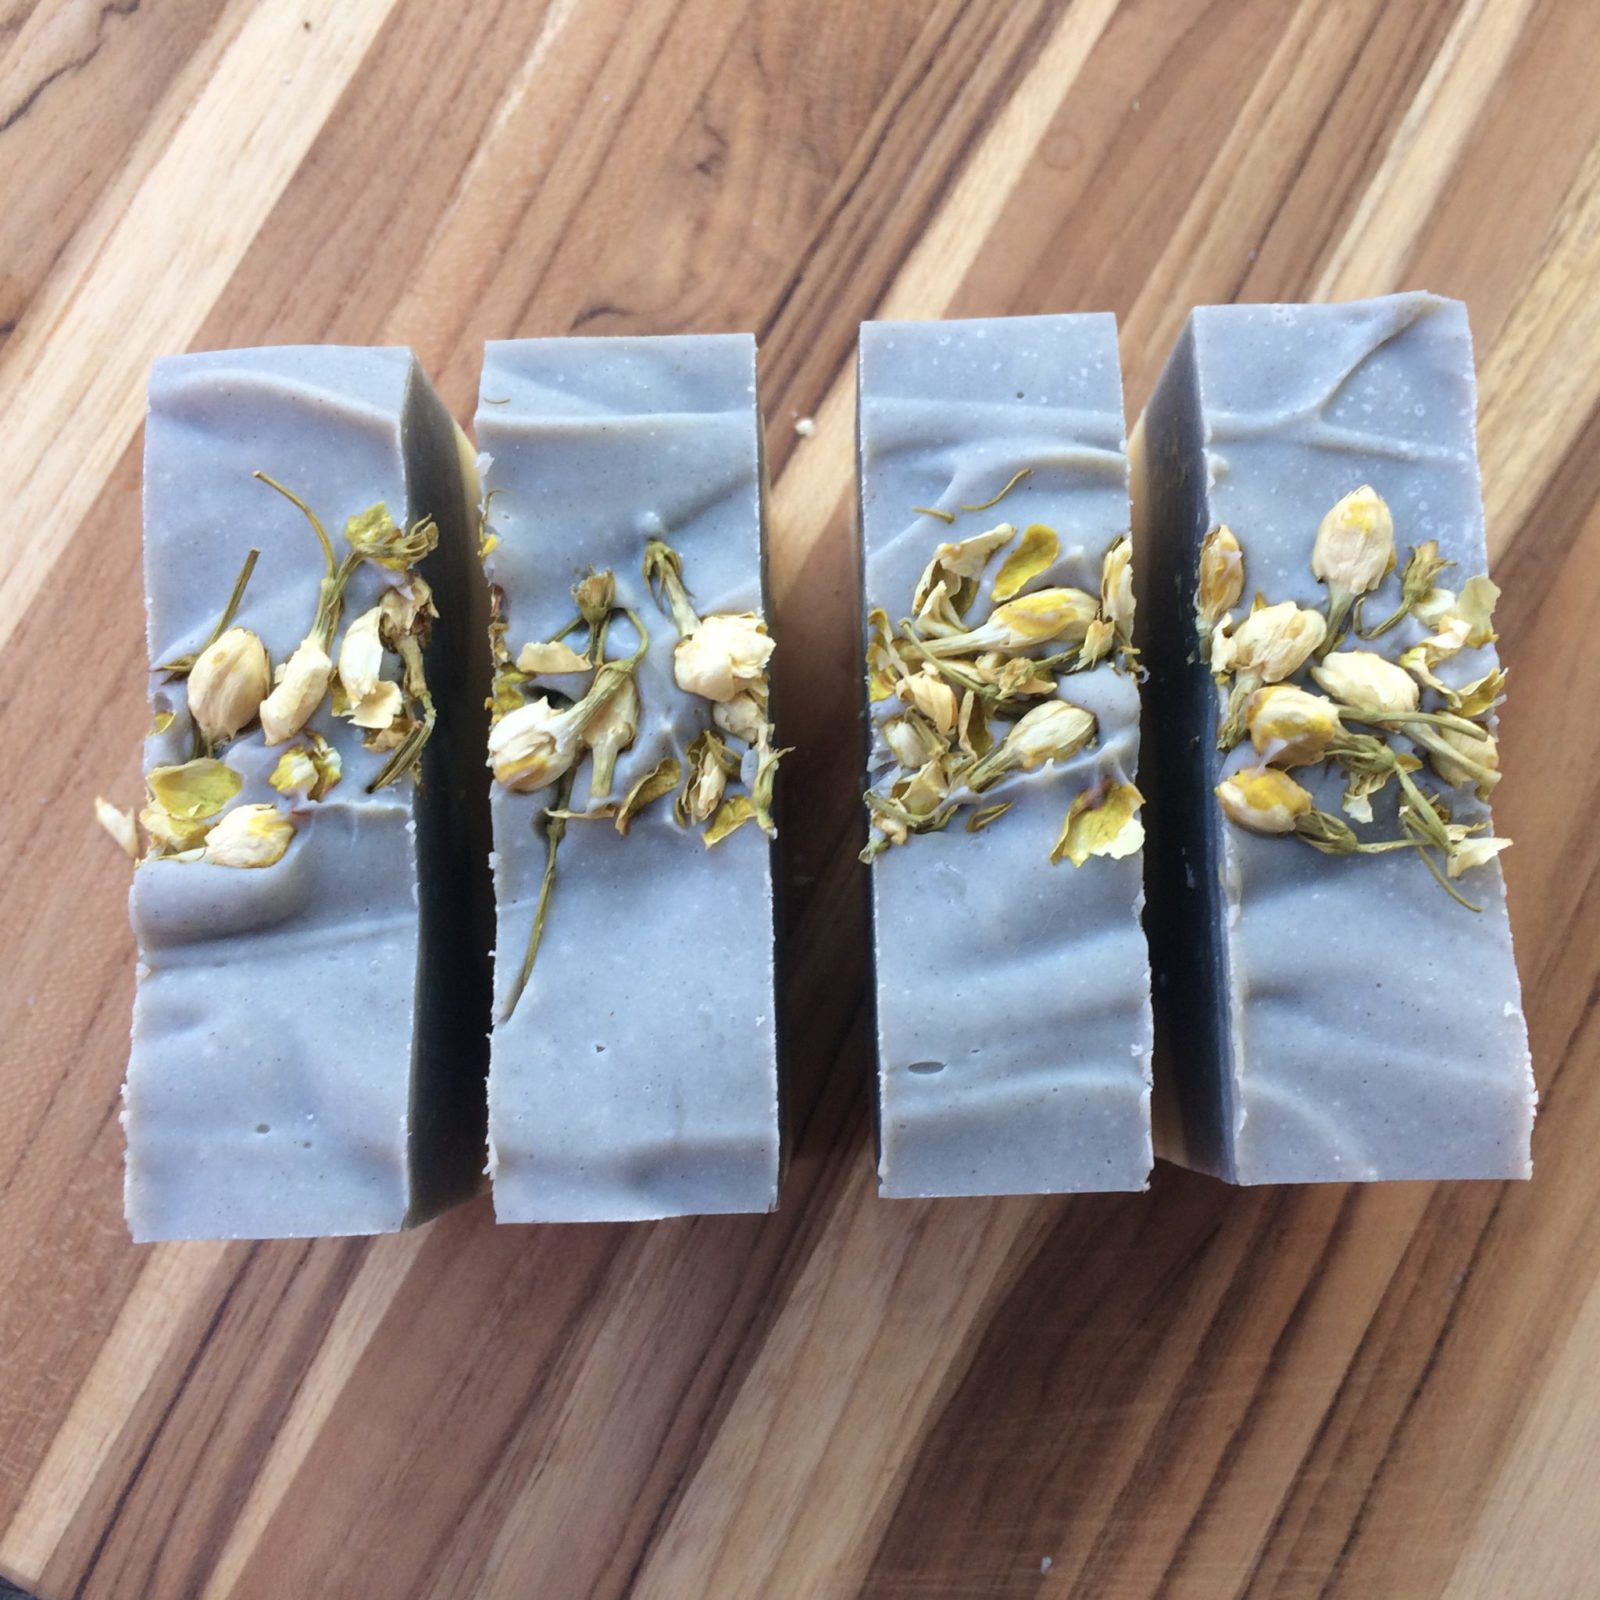 Limited Edition Natural Jasmine Soap by Old Factory